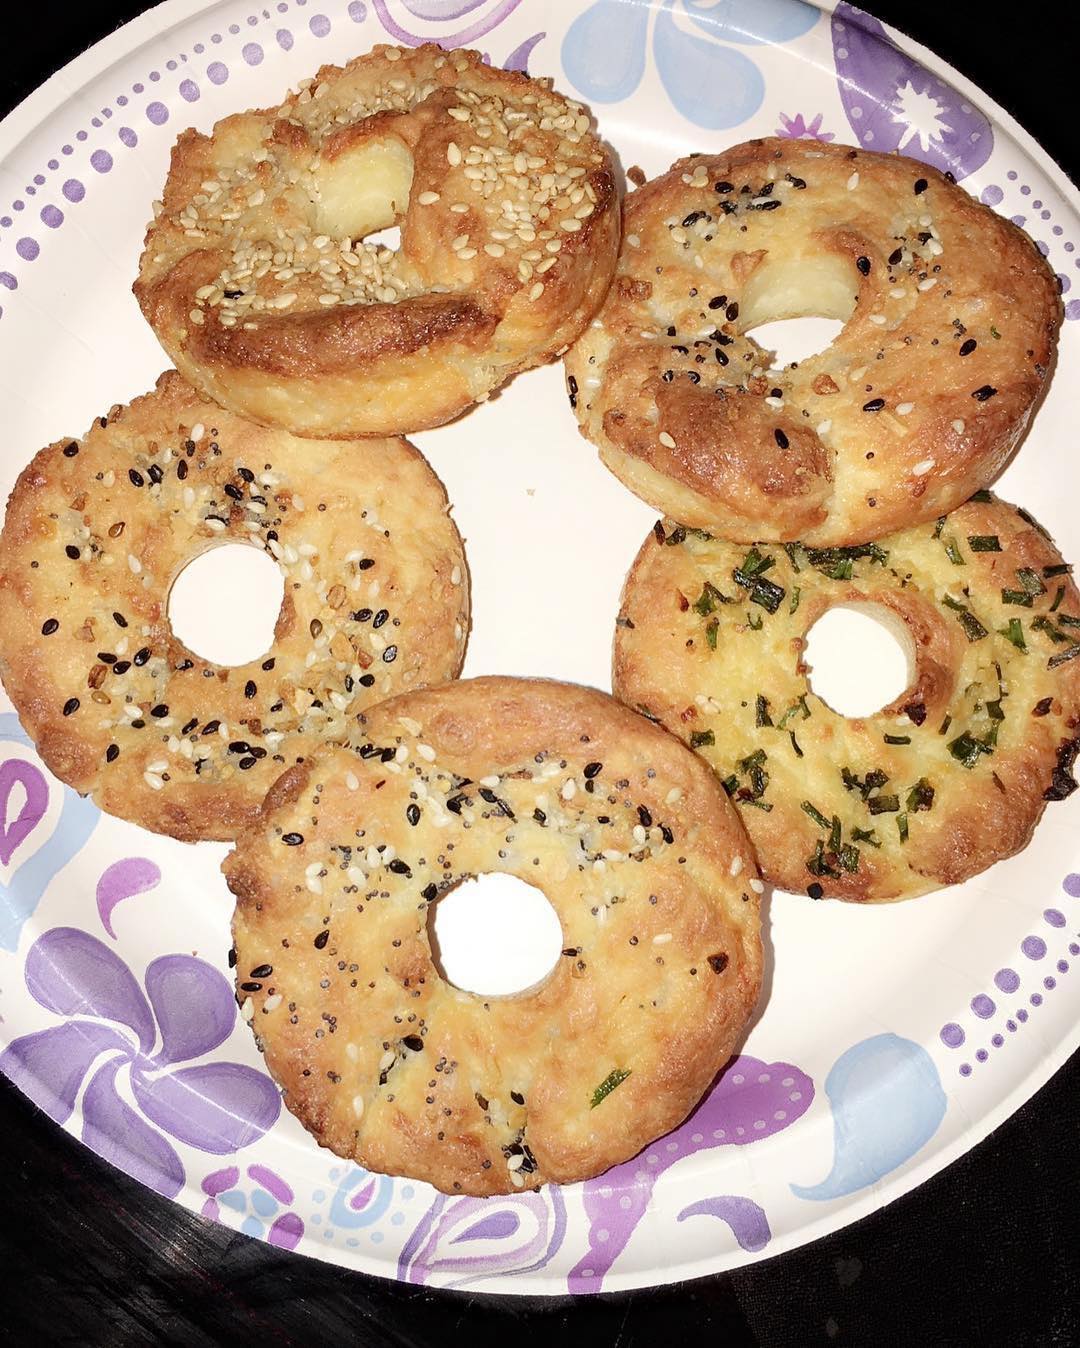 Seeing “bread” options is so awesome… gonna have to make some of these bagels!
——
Repost @keto_megsta
・・・
1 cup of almond flour 1 tsp of xanthan gum and 1 egg mix and set aside…. 1.5 cups of shredded mozzarella and 2 tbsp of cream cheese microwave and then add to dry ingredients. Form into bagels or put in donut pan (so happy I bought these). Bake at 400 for about 15 mins or until they look ready. On some of them there is the bagel seasoning from TraderJoes, one with poppy seeds and one with garlic and chives…. YES YES AND YES